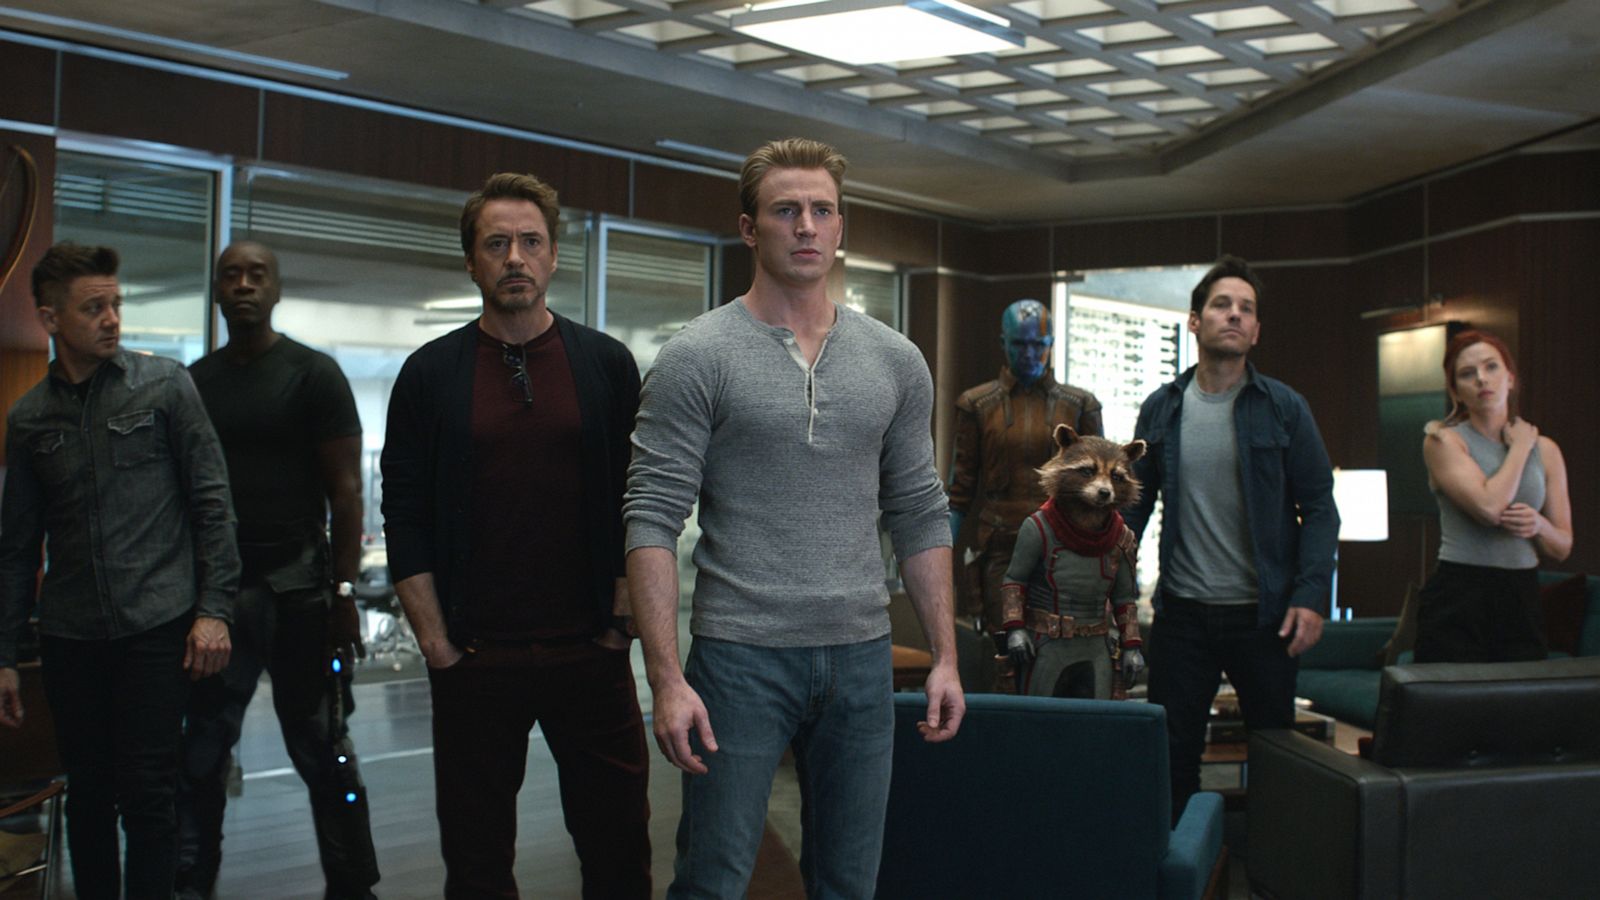 Avengers: Endgame's Best Deleted Sequence Isn't Out Yet & It May Show Up  One Day Hope Russo Brothers